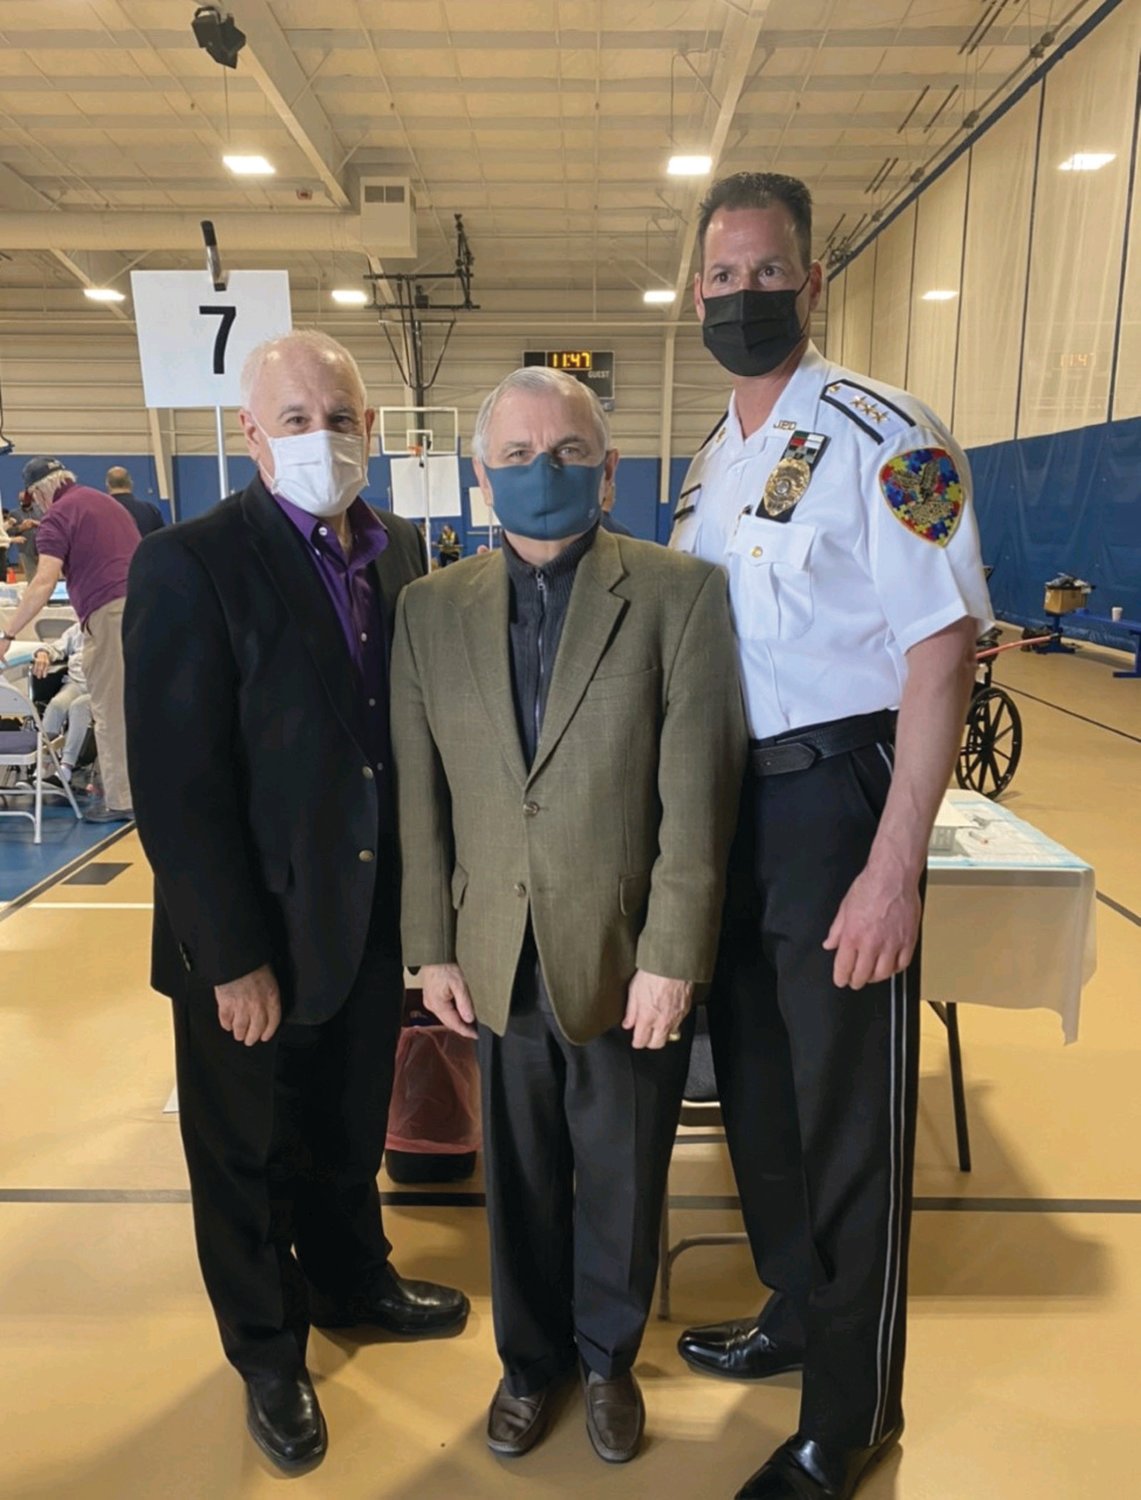 IMPRESSIVE INPUT: U.S. Senator Jack Reed made a special visit to a recent POD Clinic in Johnston and told Mayor Joseph and Police Chief Joseph Razza how impressed he was with the “outstanding organization and social distancing practices” during a host of vaccinations for area residents.